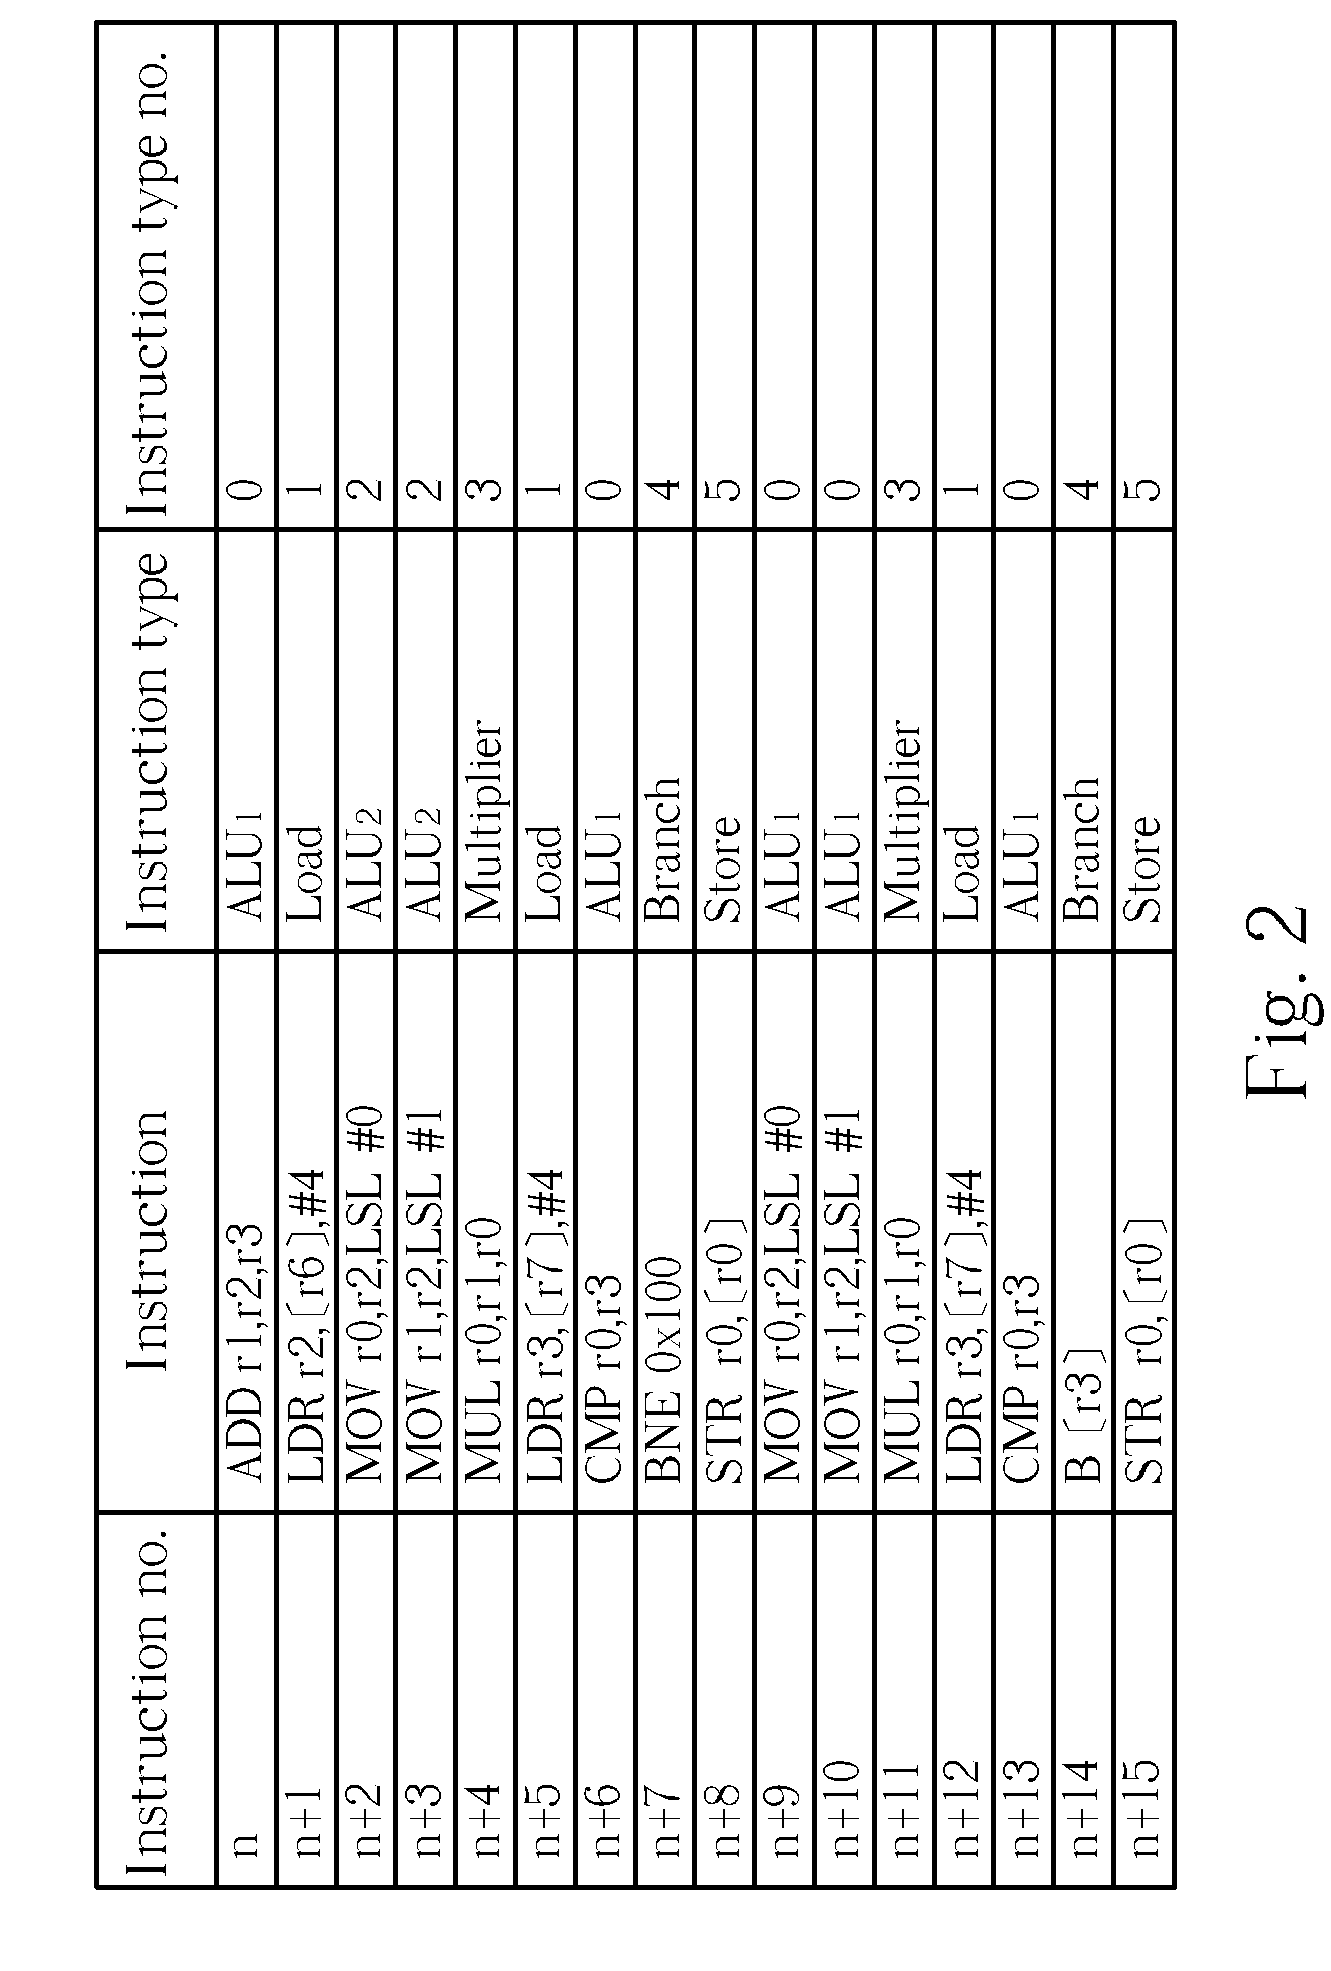 Digital logic test method to systematically approach functional coverage completely and related apparatus and system